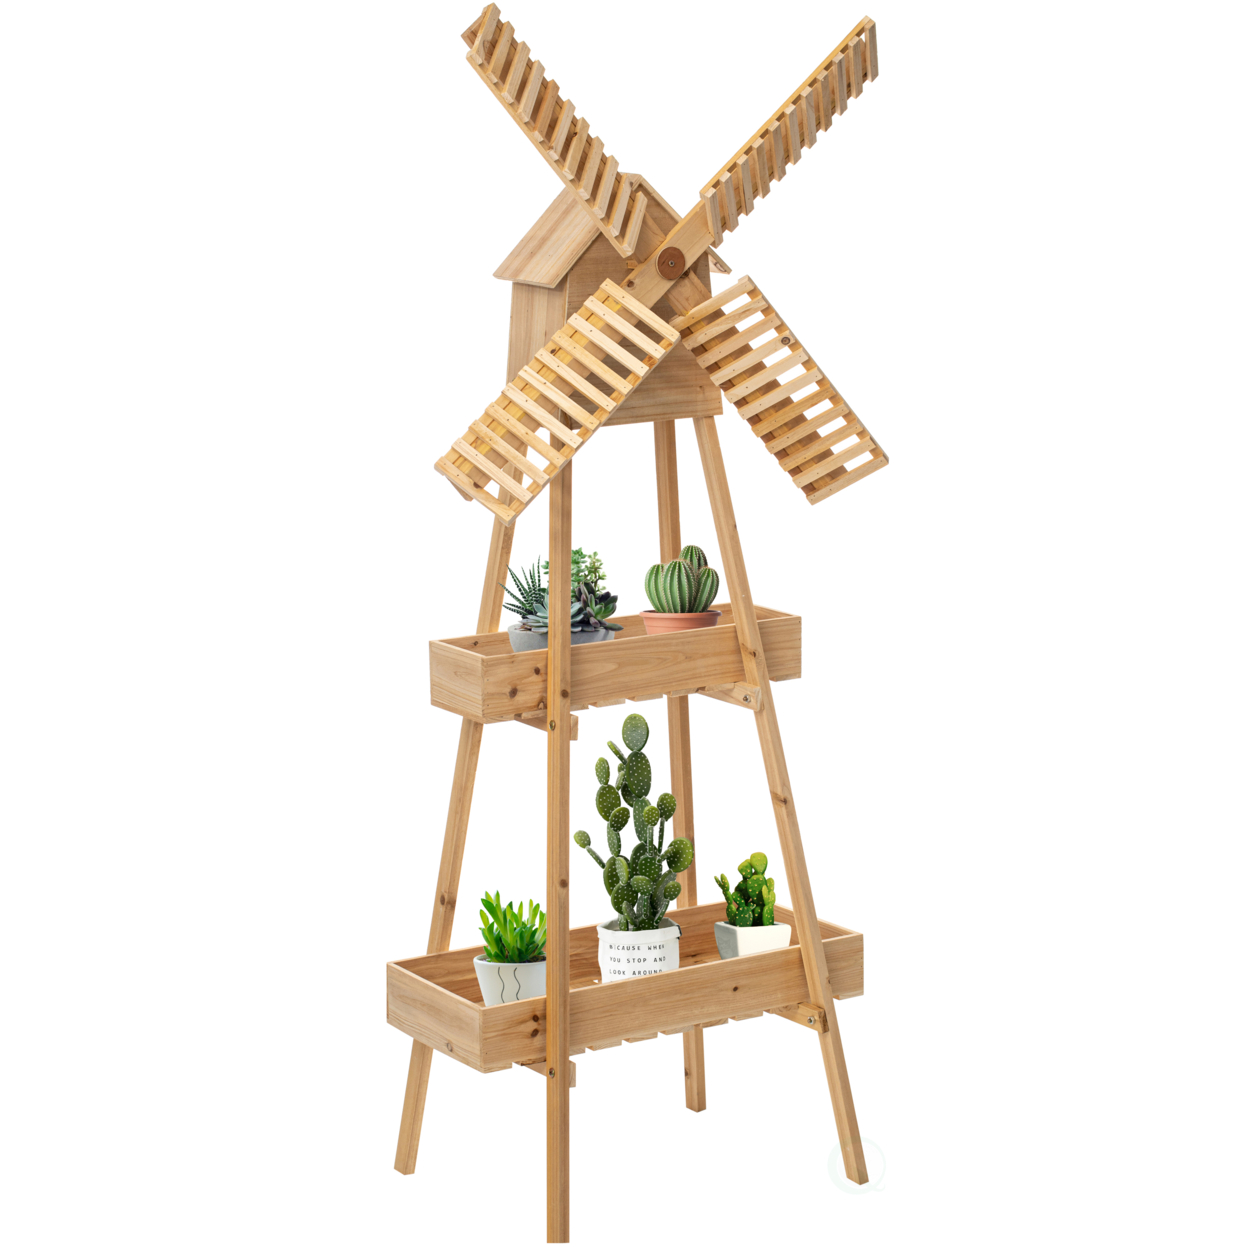 Wooden Cart With Windmill Accent, Versatile And Decorative Piece For Home Or Garden Decor, Perfect For Displaying Plants, Books, Decor Items